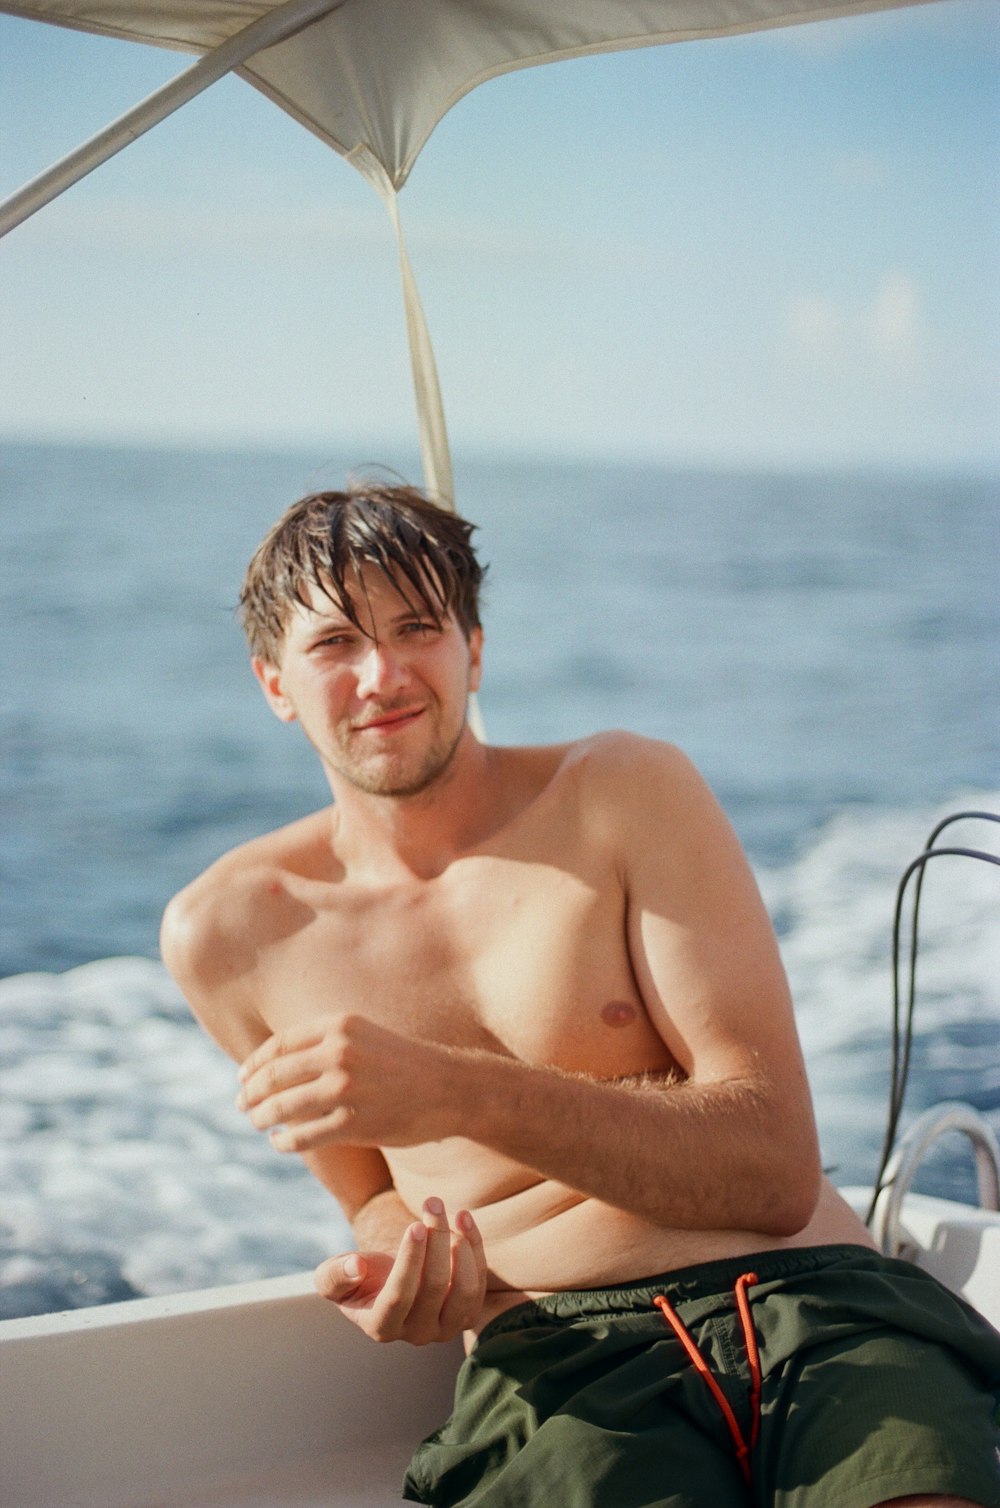 a shirtless man sitting on a boat in the ocean